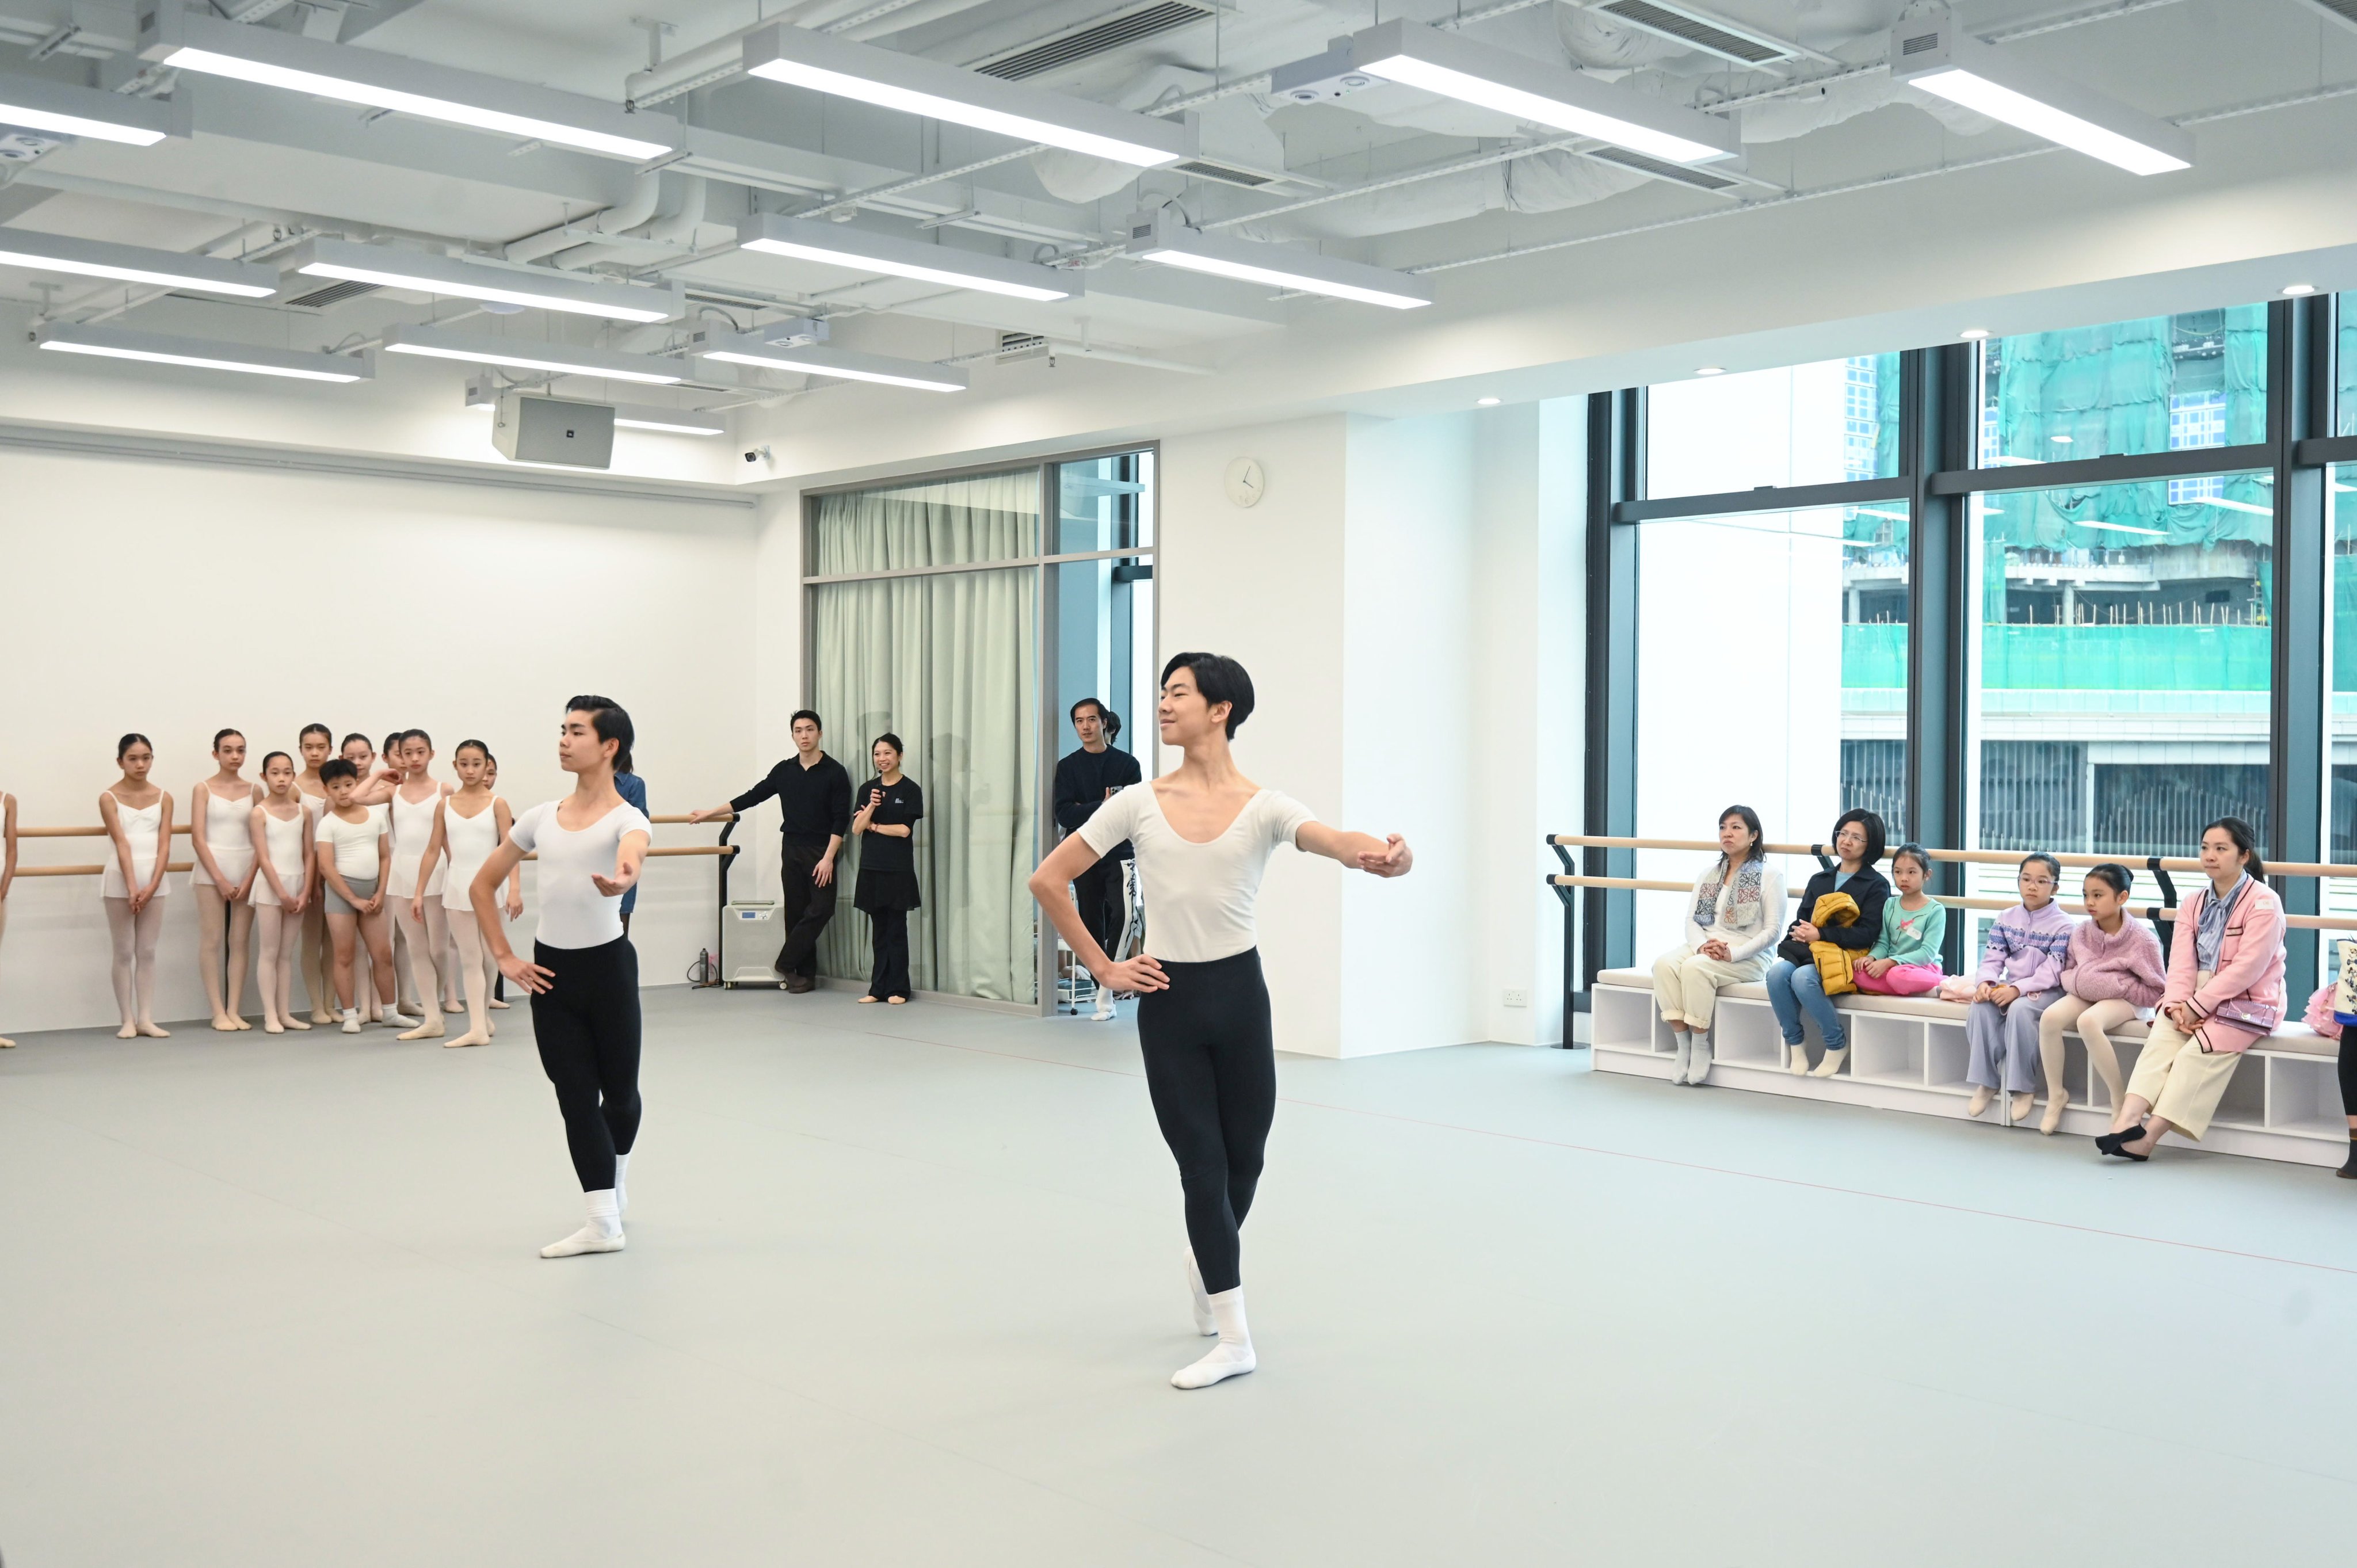 Programmes at the Hong Kong Ballet are proving that the dance isn’t just for girls. Photo: Handout